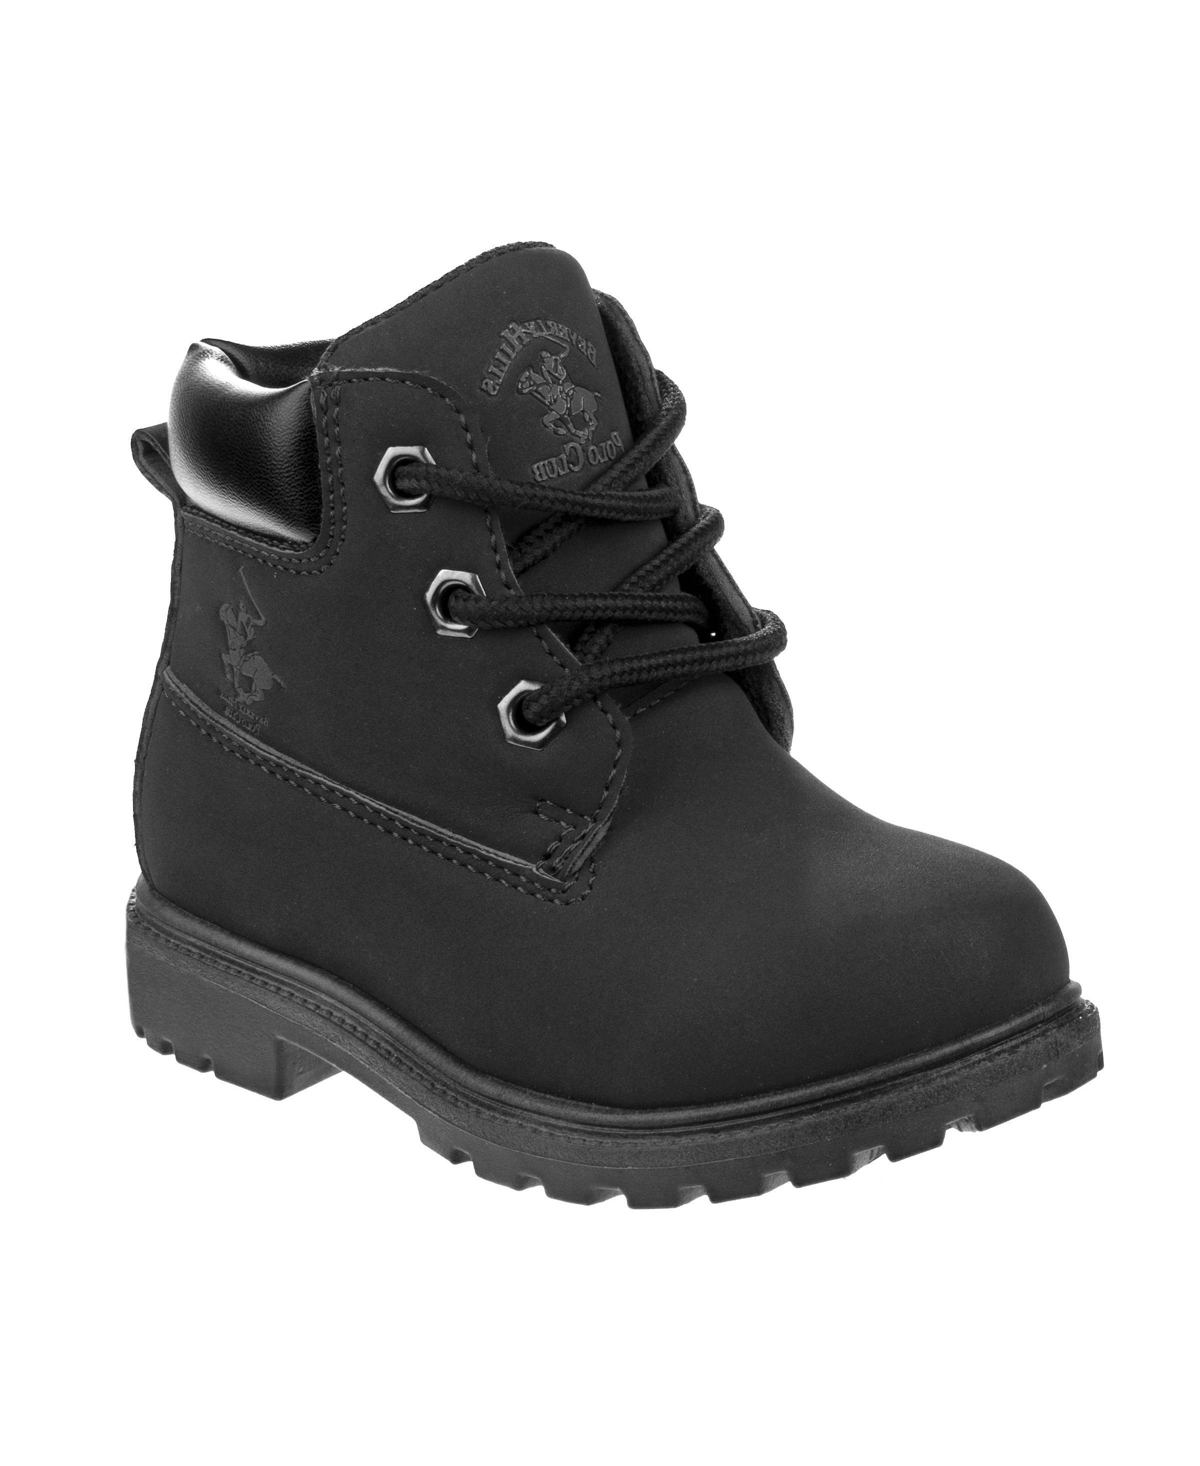 Beverly Hills Polo Club Babies' Toddler Lace-up Construction Boots In Black